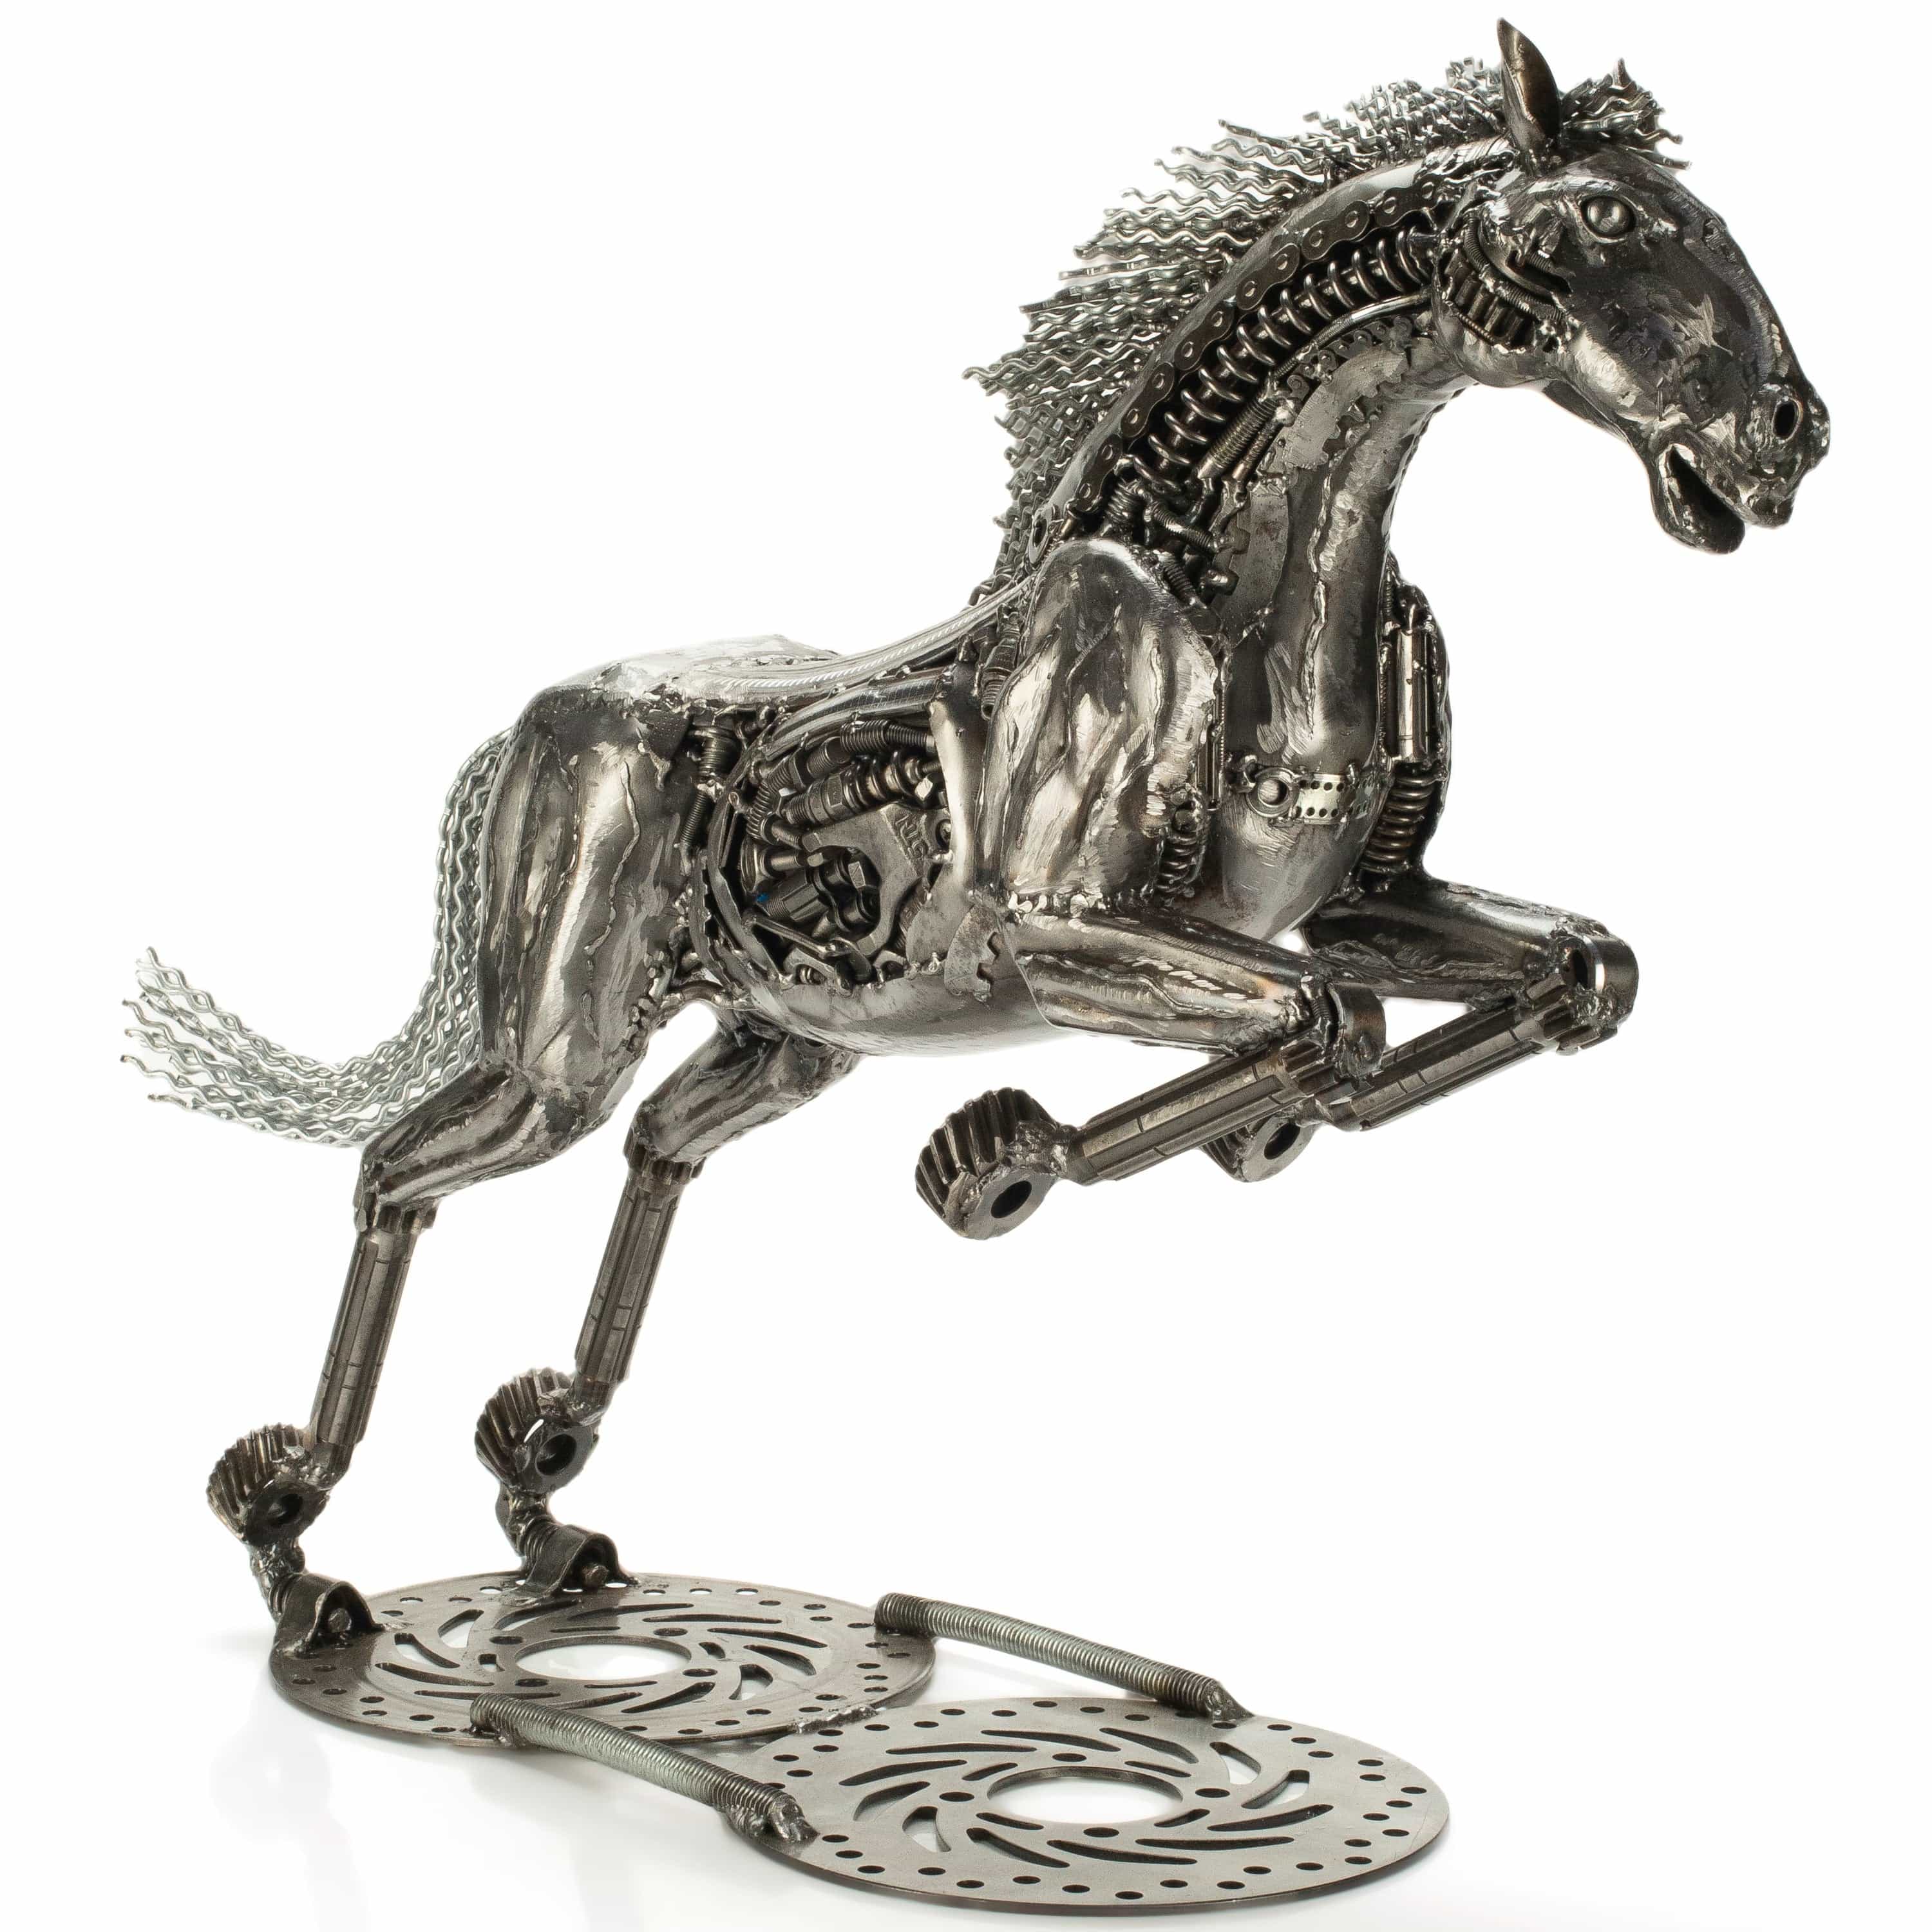 KALIFANO Recycled Metal Art 25" Horse Inspired Recycled Metal Art Sculpture RMS-HS69x63-PK